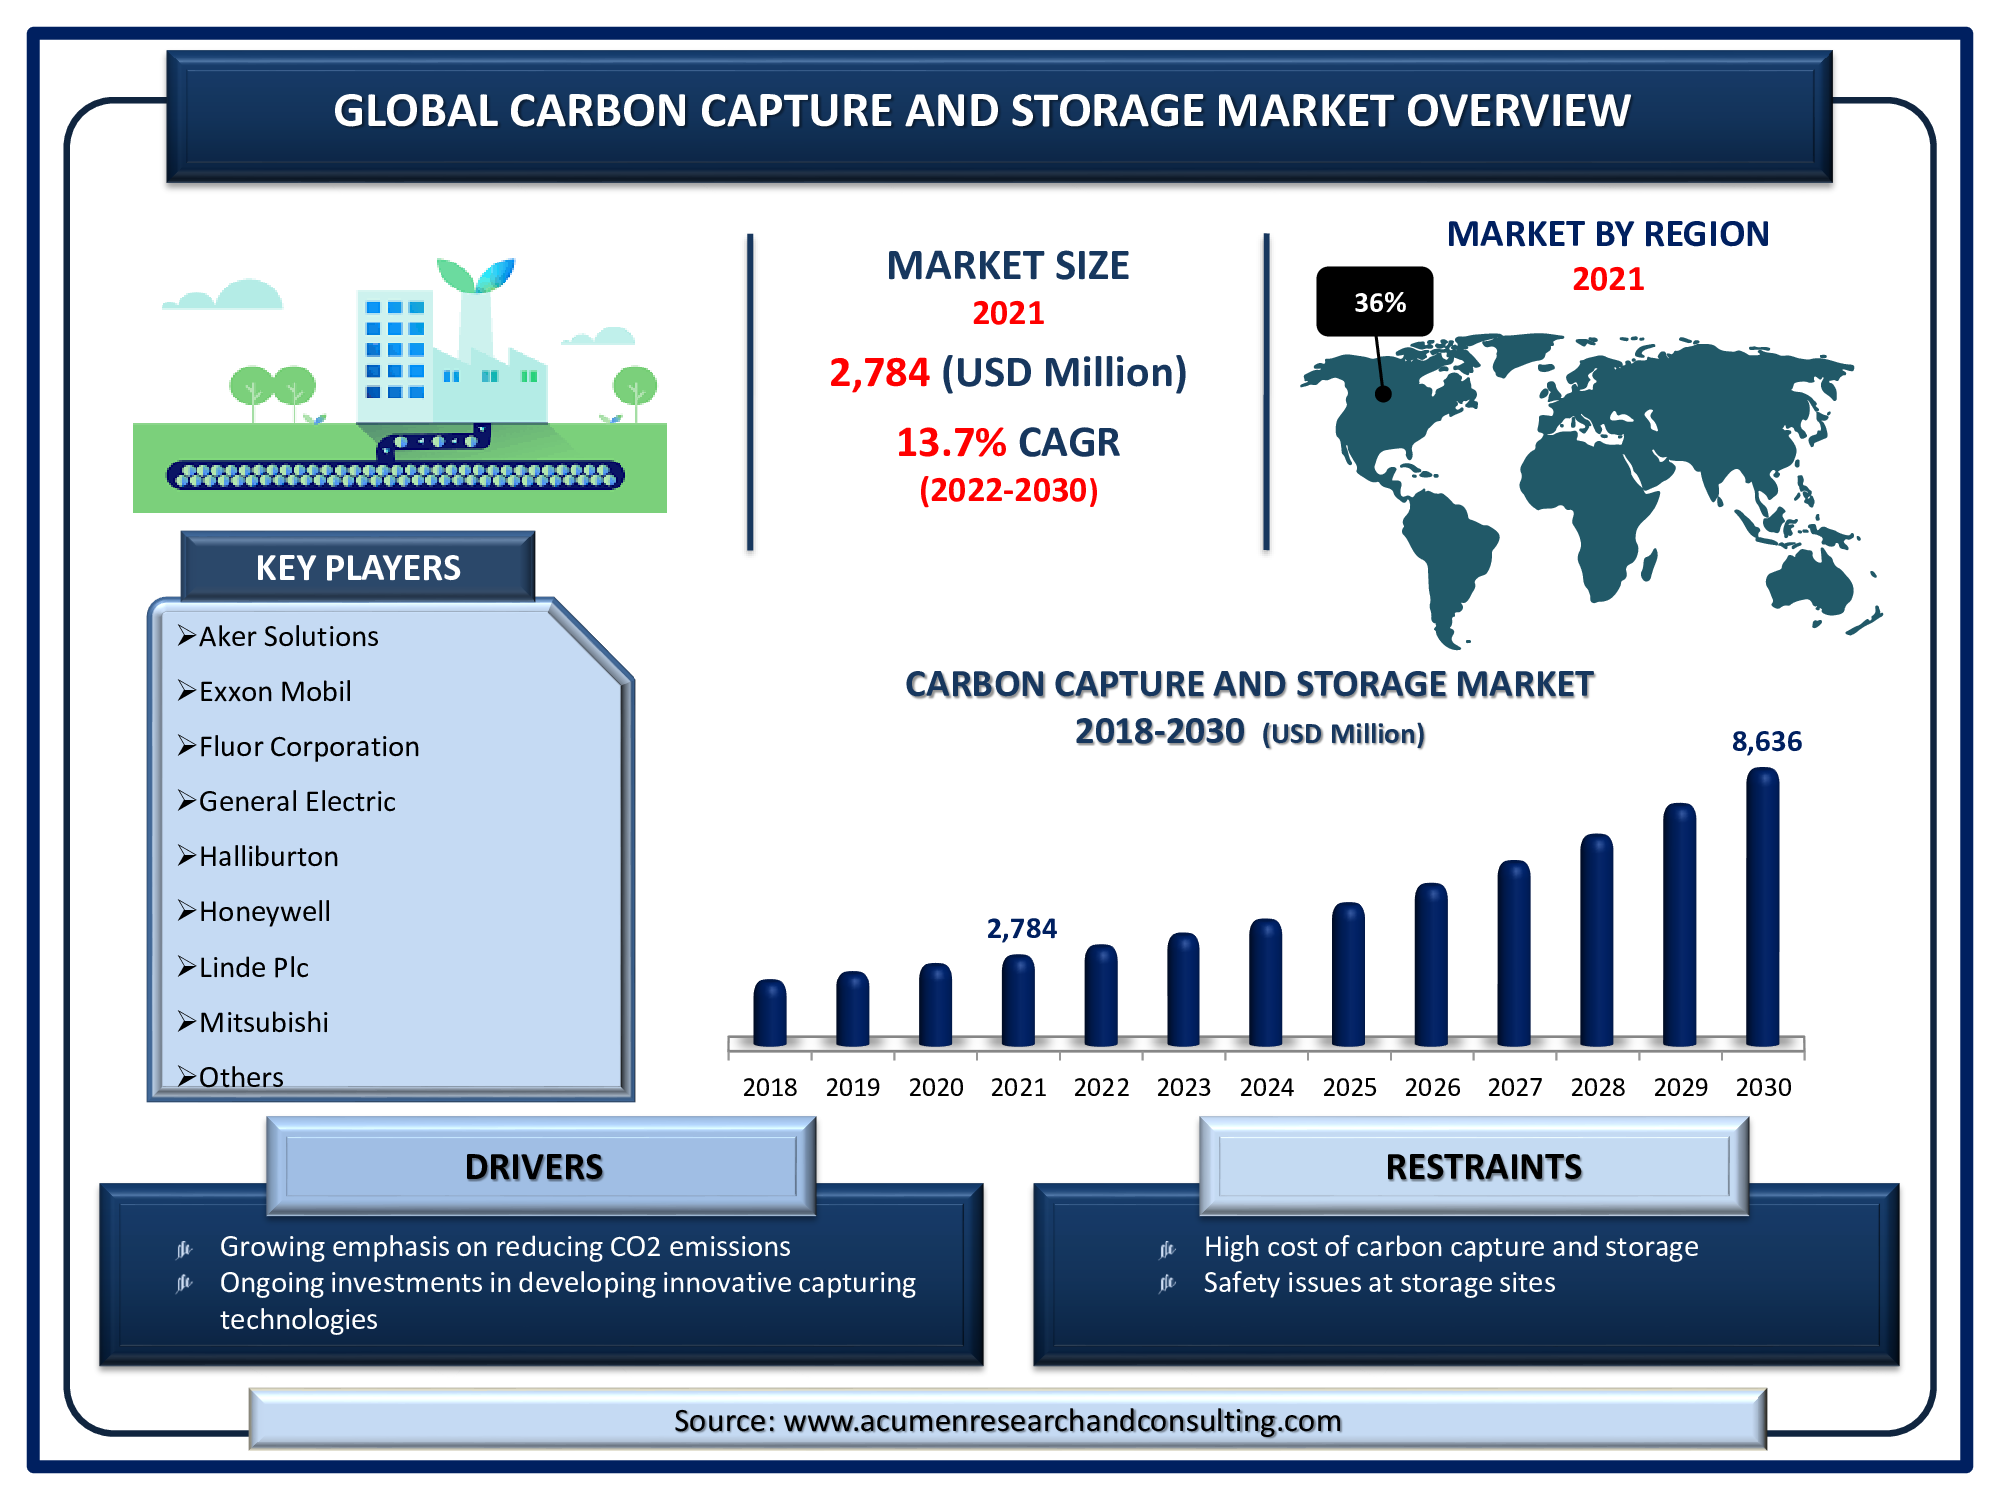 Carbon Capture and Storage Market is estimated to reach USD 8,636 by 2030, with a significant CAGR of 13.7%